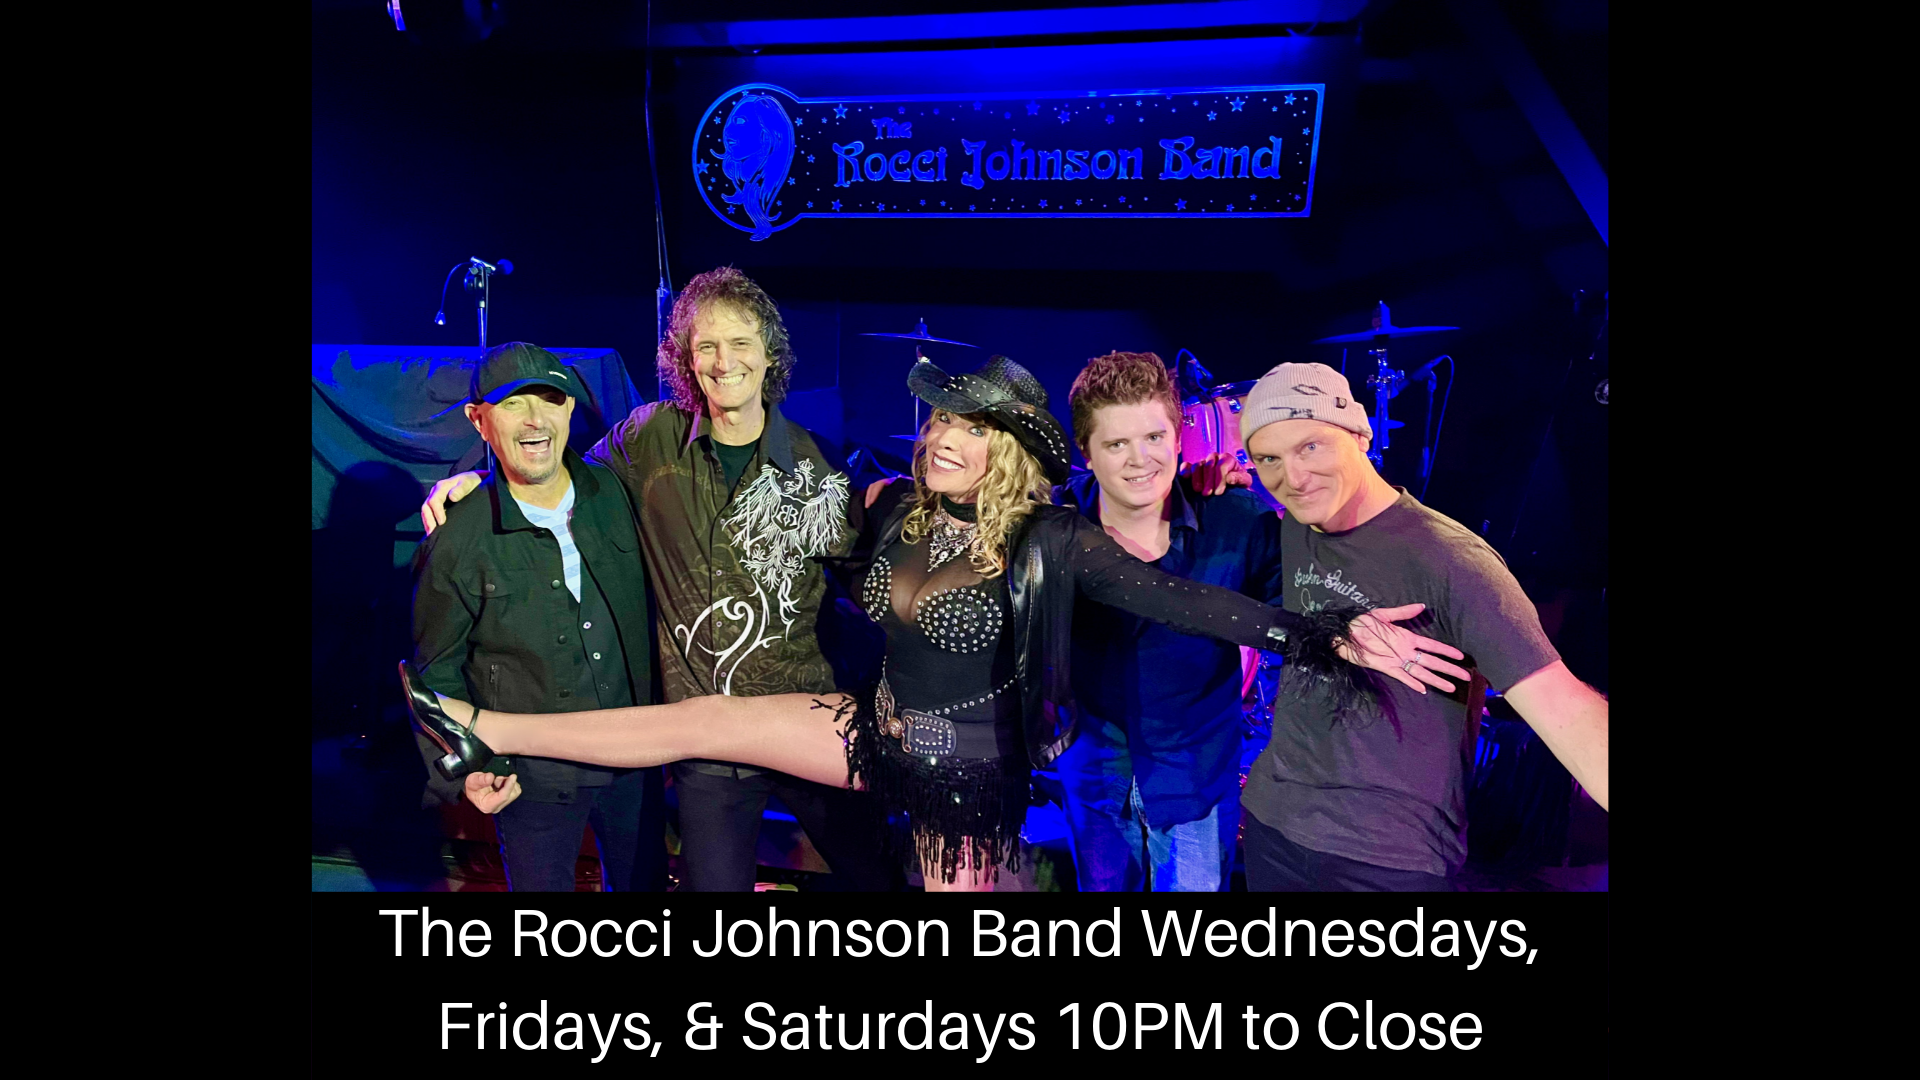 The Rocci Johnsons Band every Wednesday, Friday, & Saturday